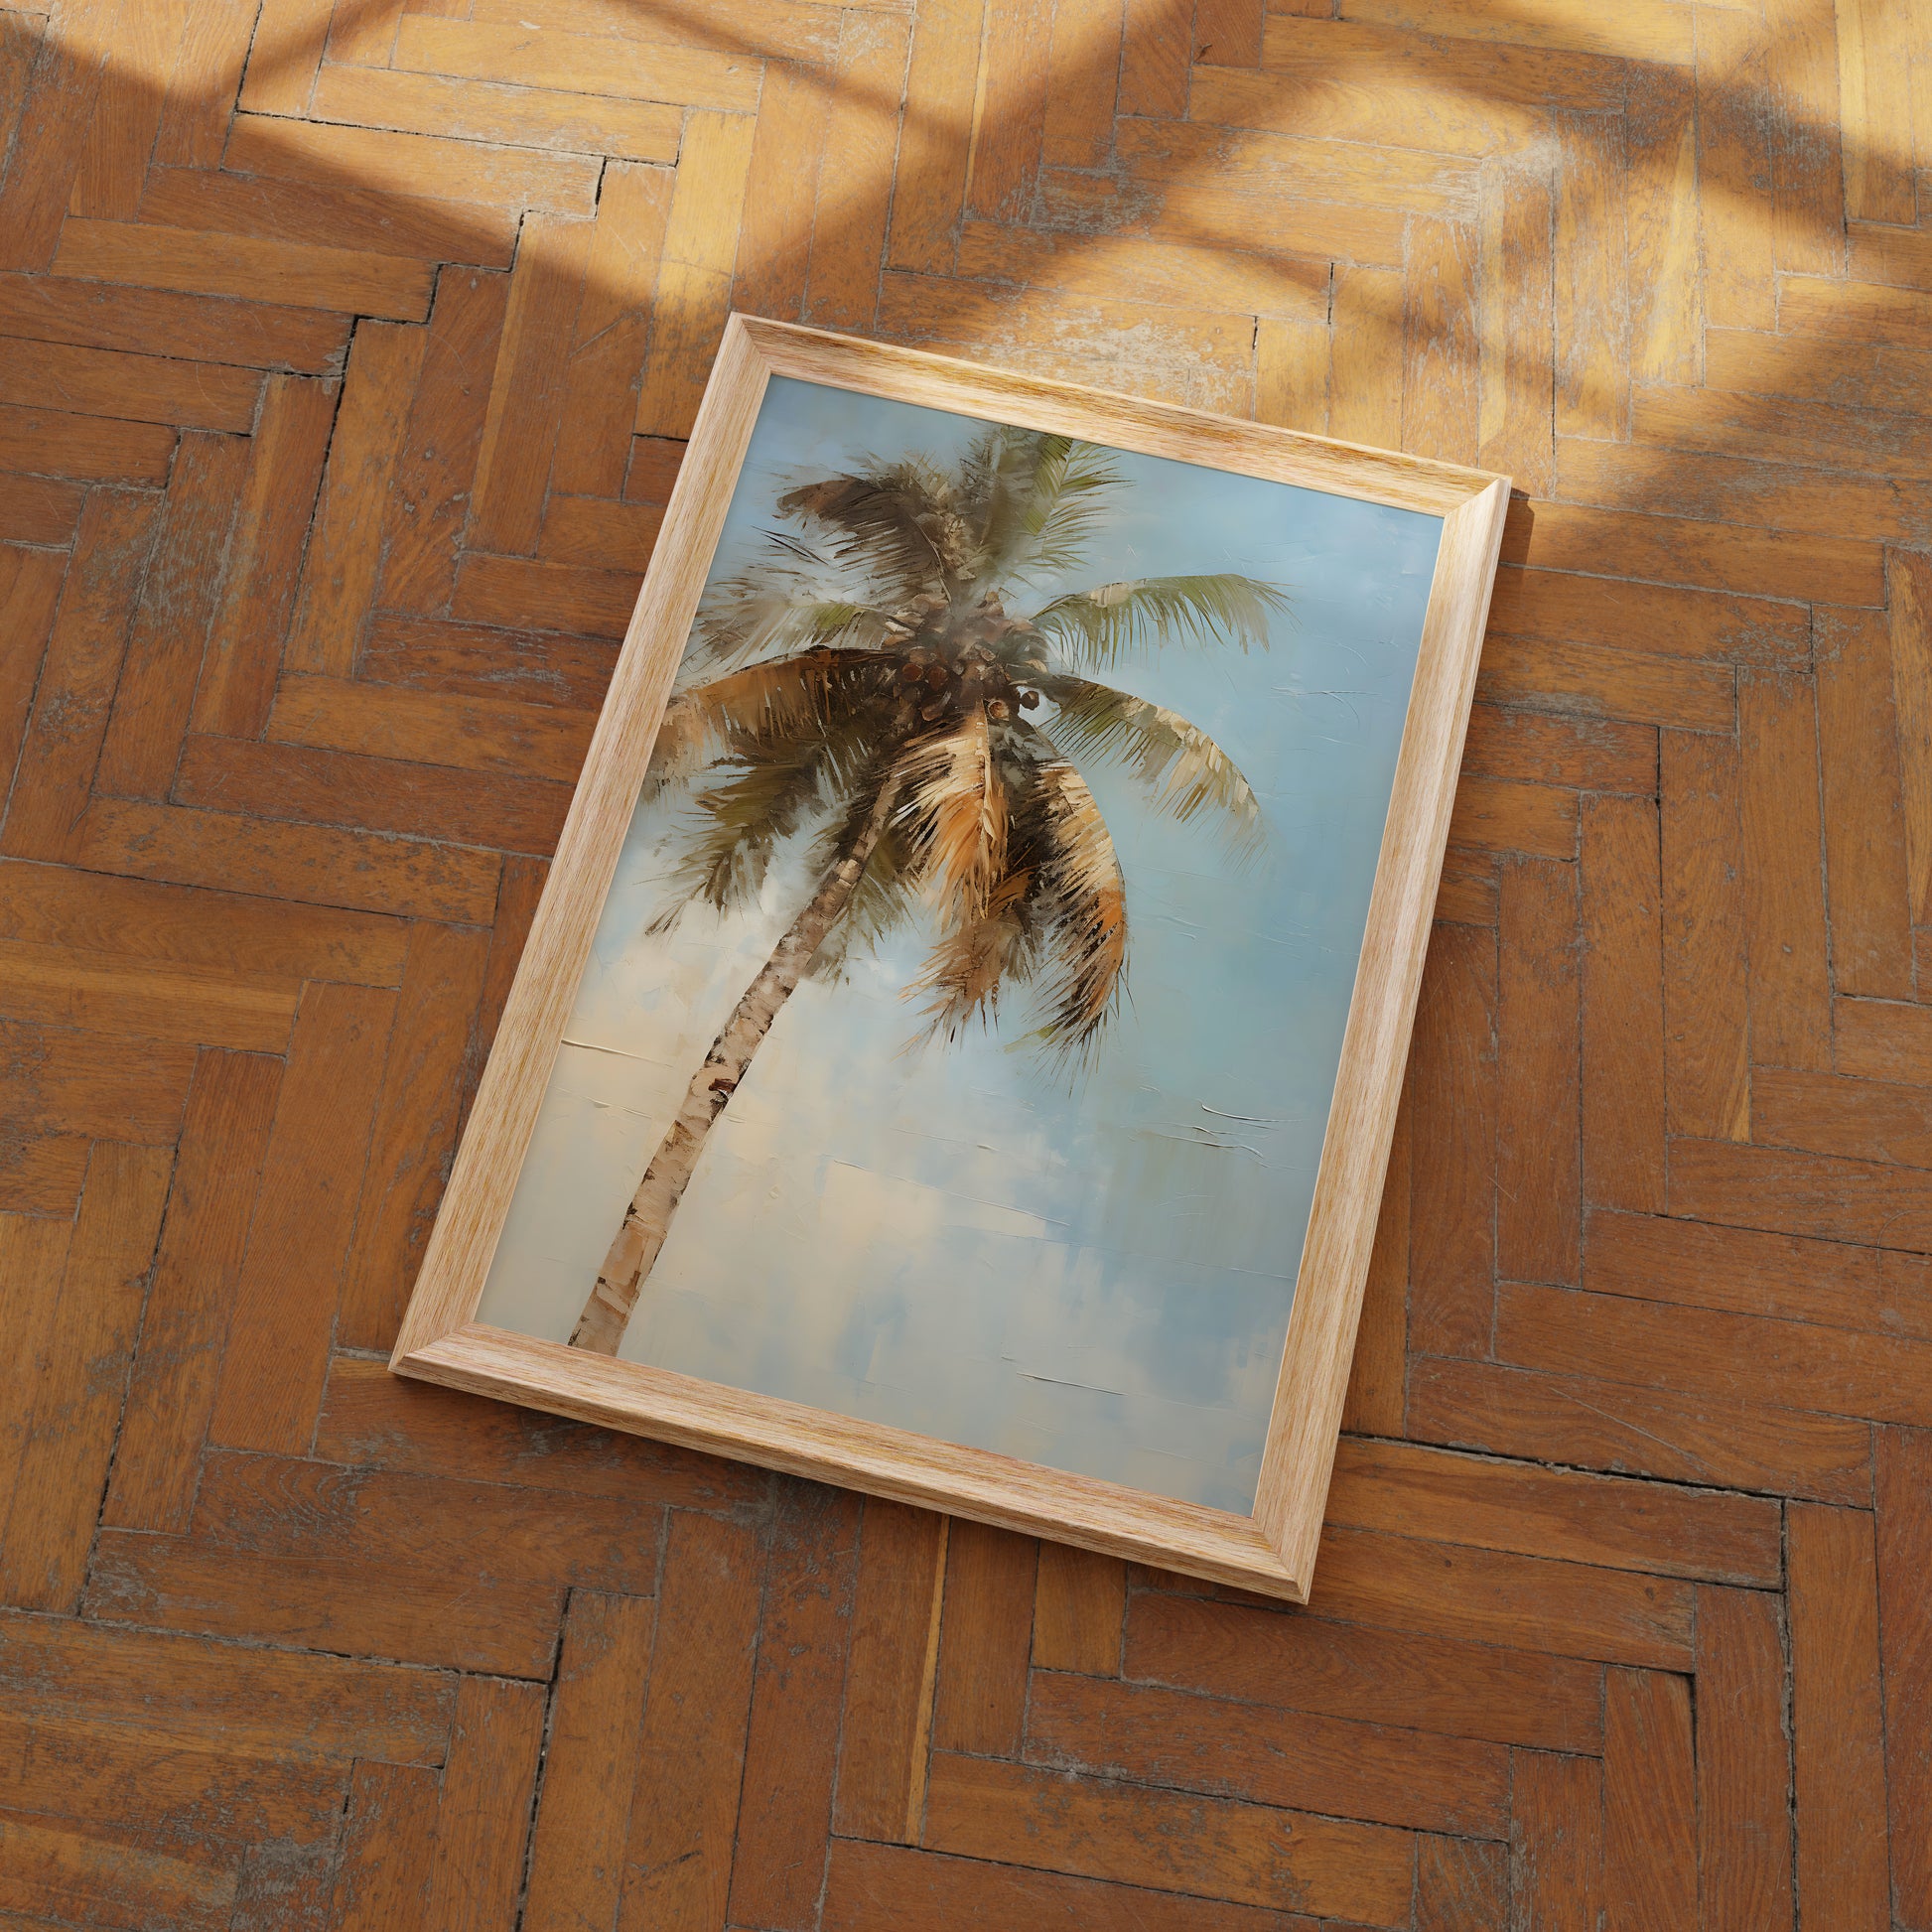 A framed painting of a palm tree on a wooden floor.